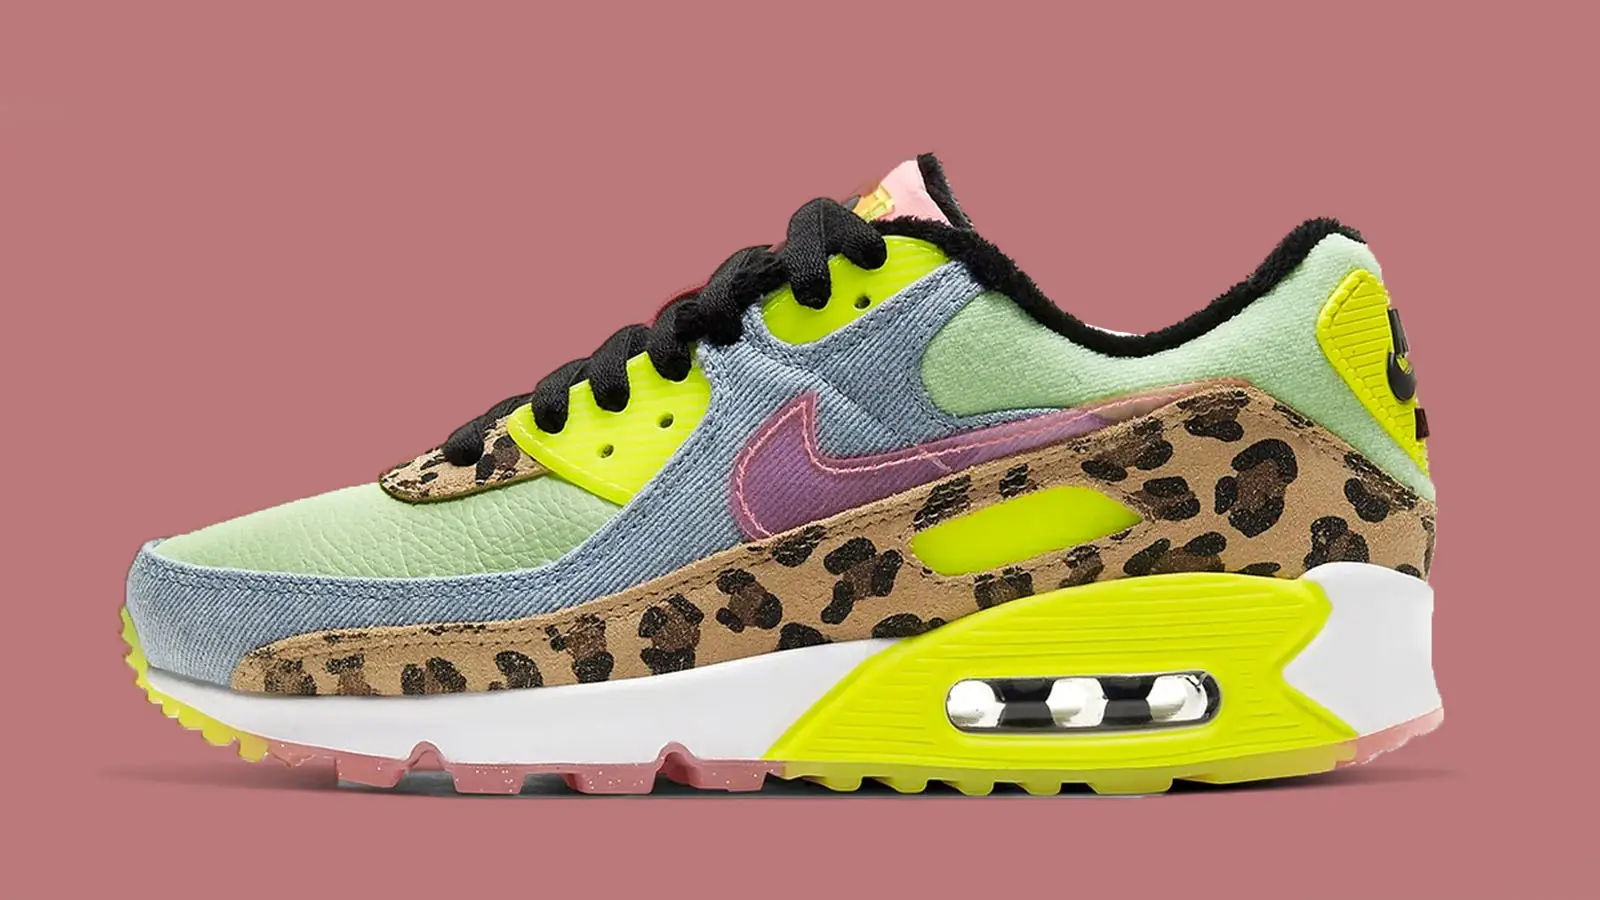 Celebrate Nike's 30th Birthday With The Nike Air Max 90 LX